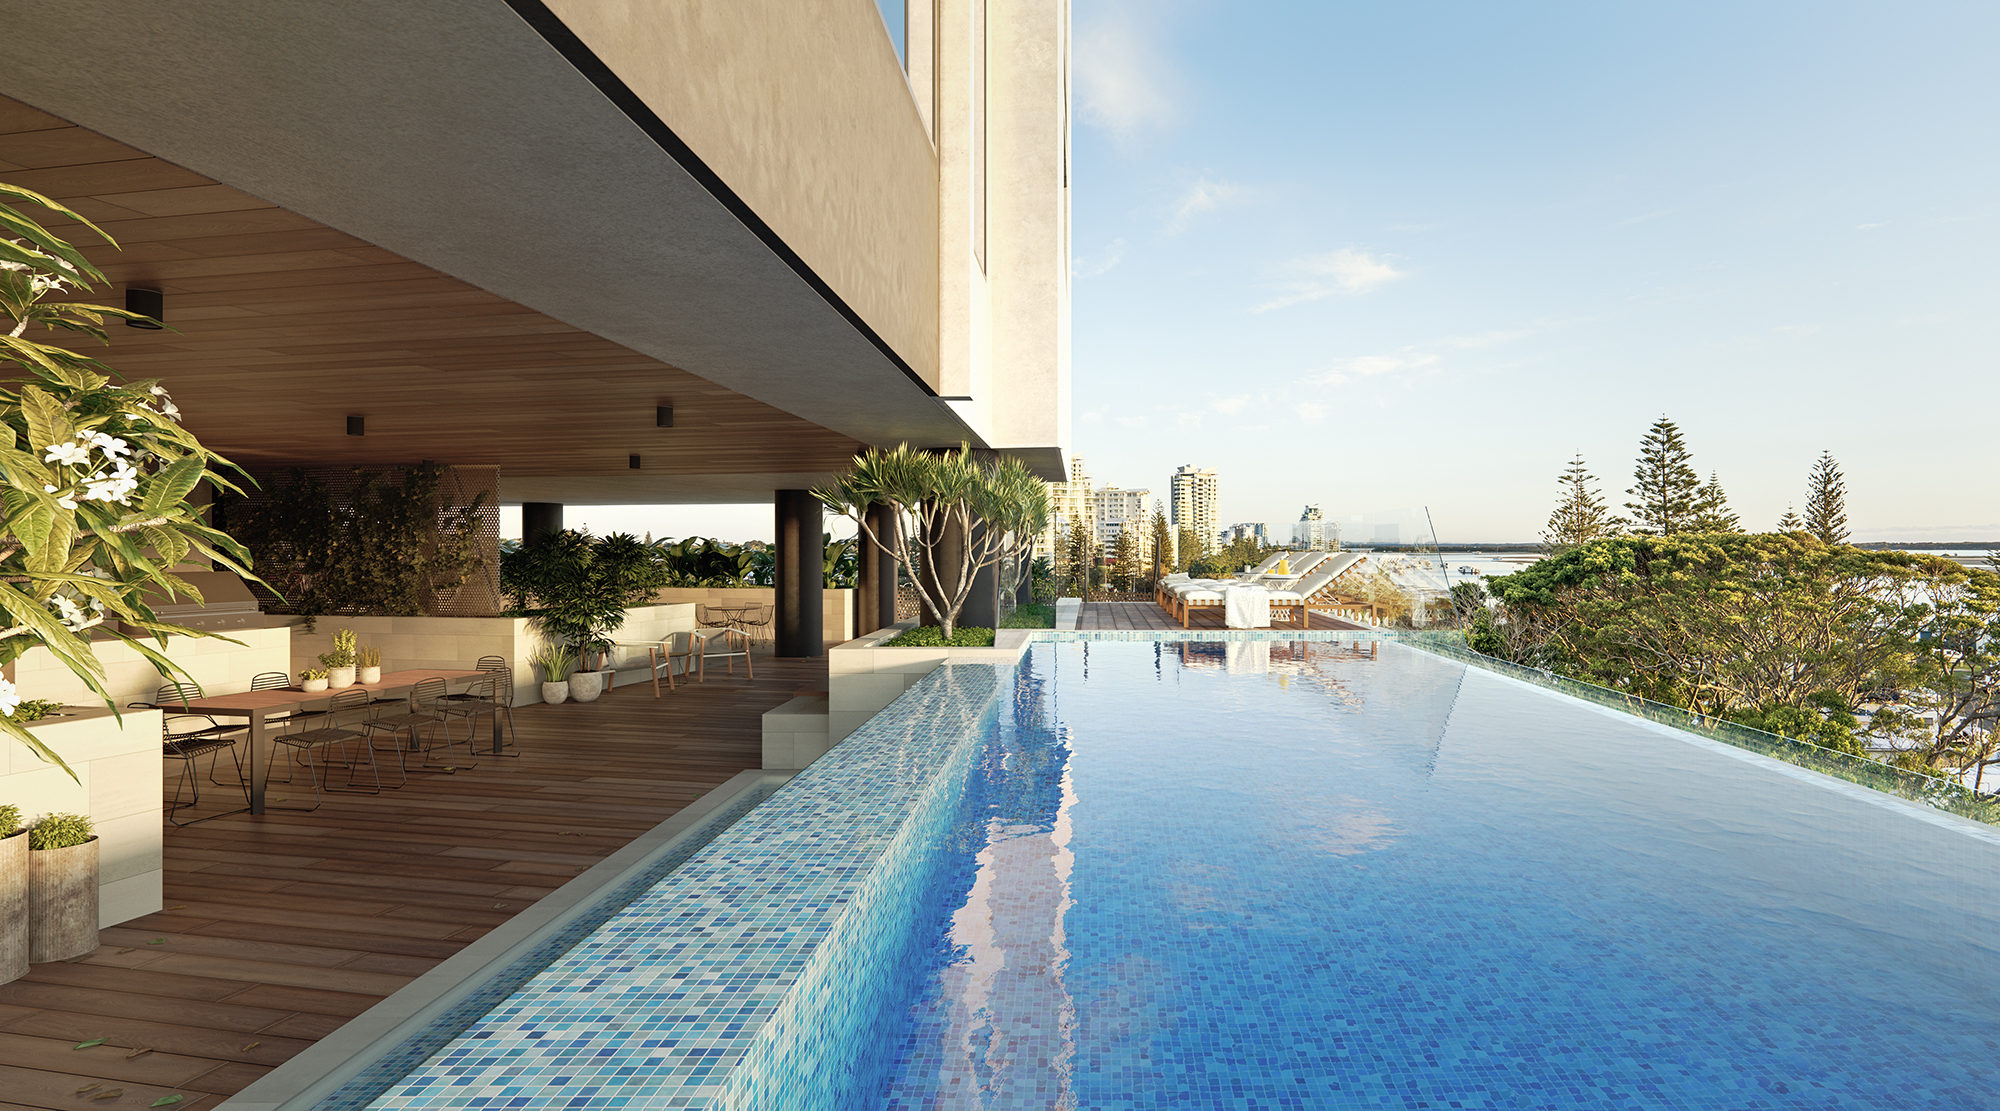 Modern apartment showing outdoor seating area and swimming pool as part of Guardian Living's relationship with Australian Unity